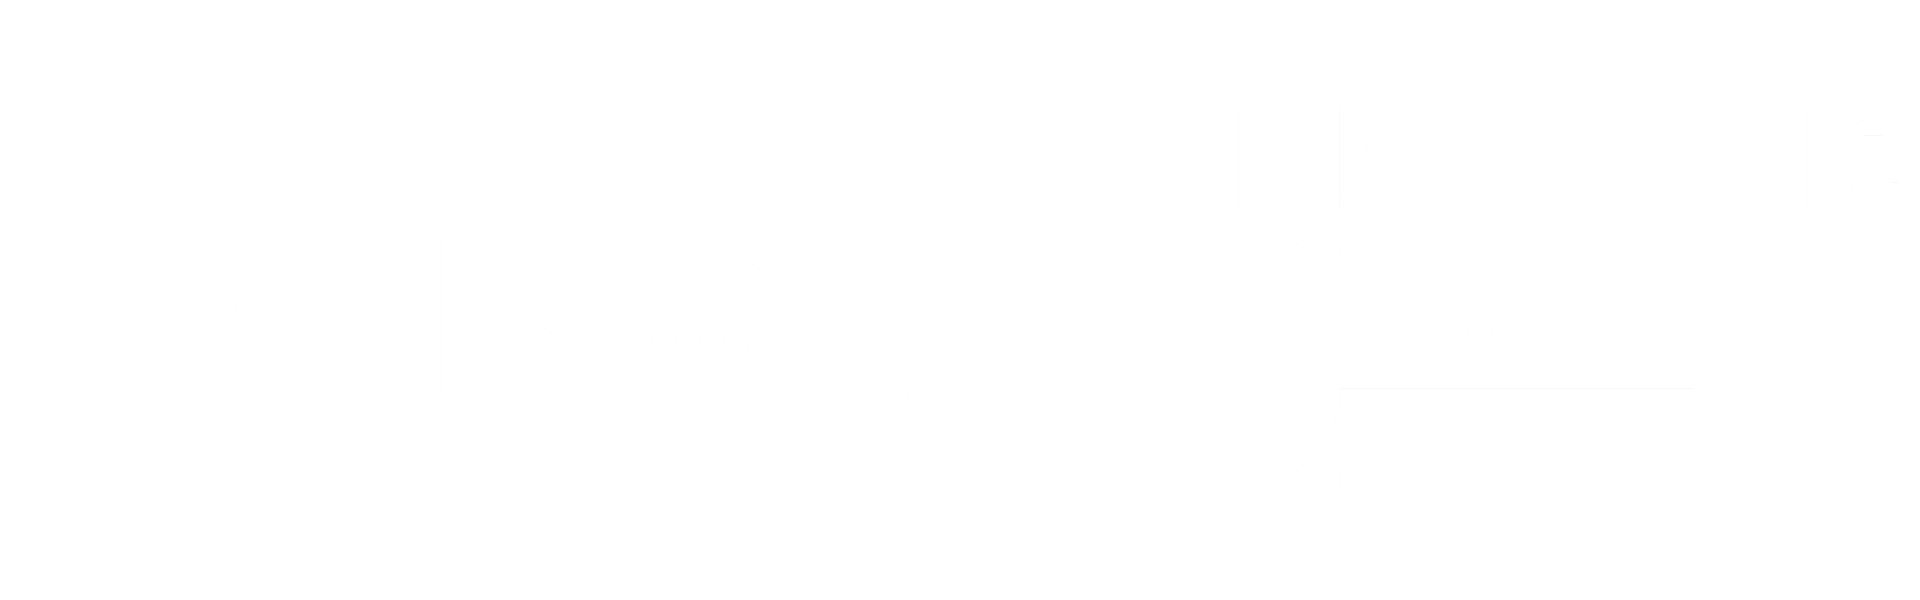 The logo of ASUS